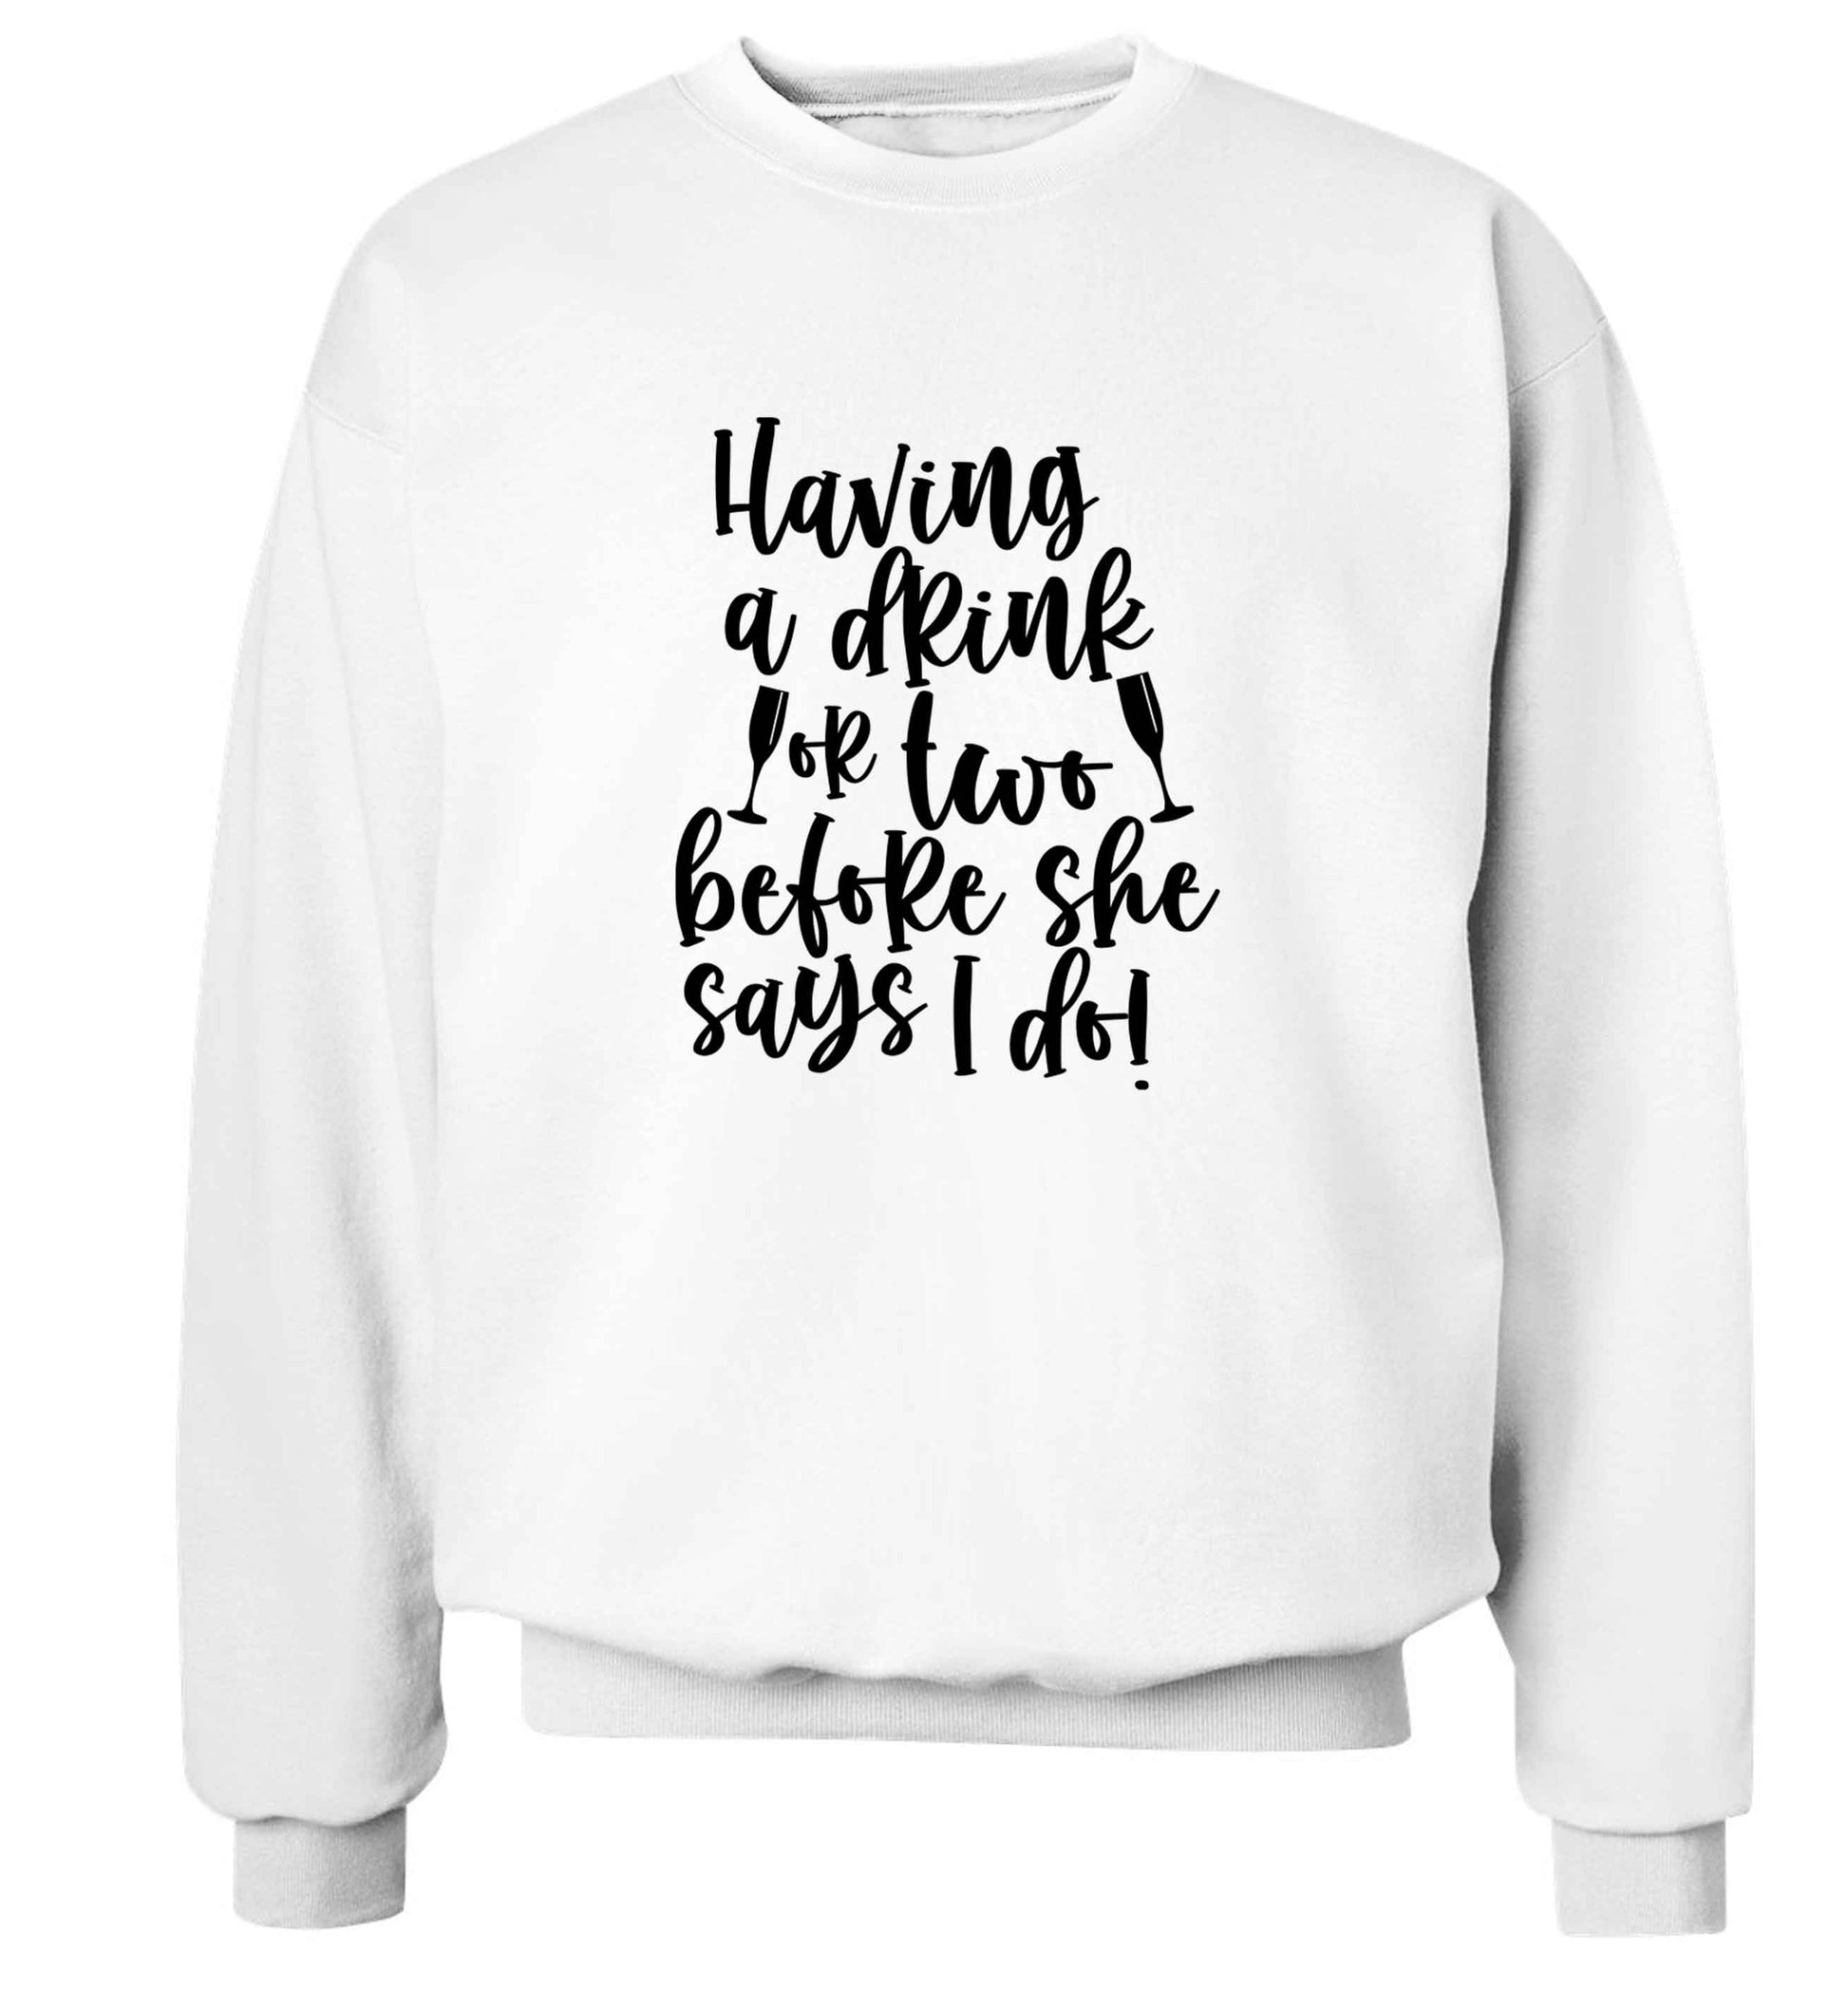 Having a drink or two before she says I do adult's unisex white sweater 2XL